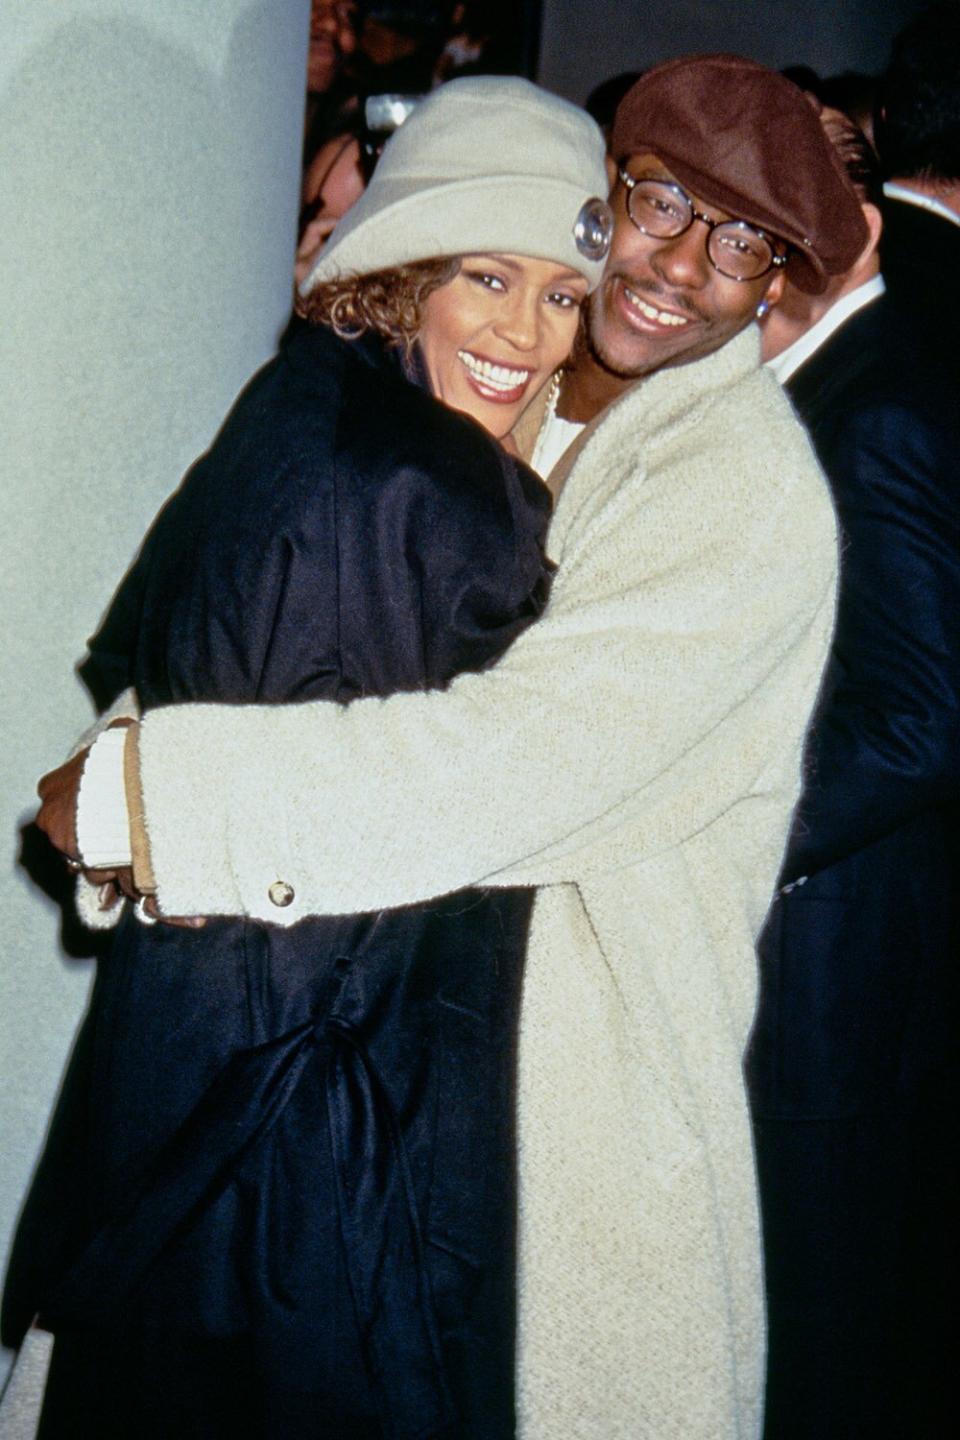 American singer Whitney Houston (1963 - 2012) with her husband Bobby Brown in New York City, circa 1997. (Photo by Victor Malafronte/Getty Images)